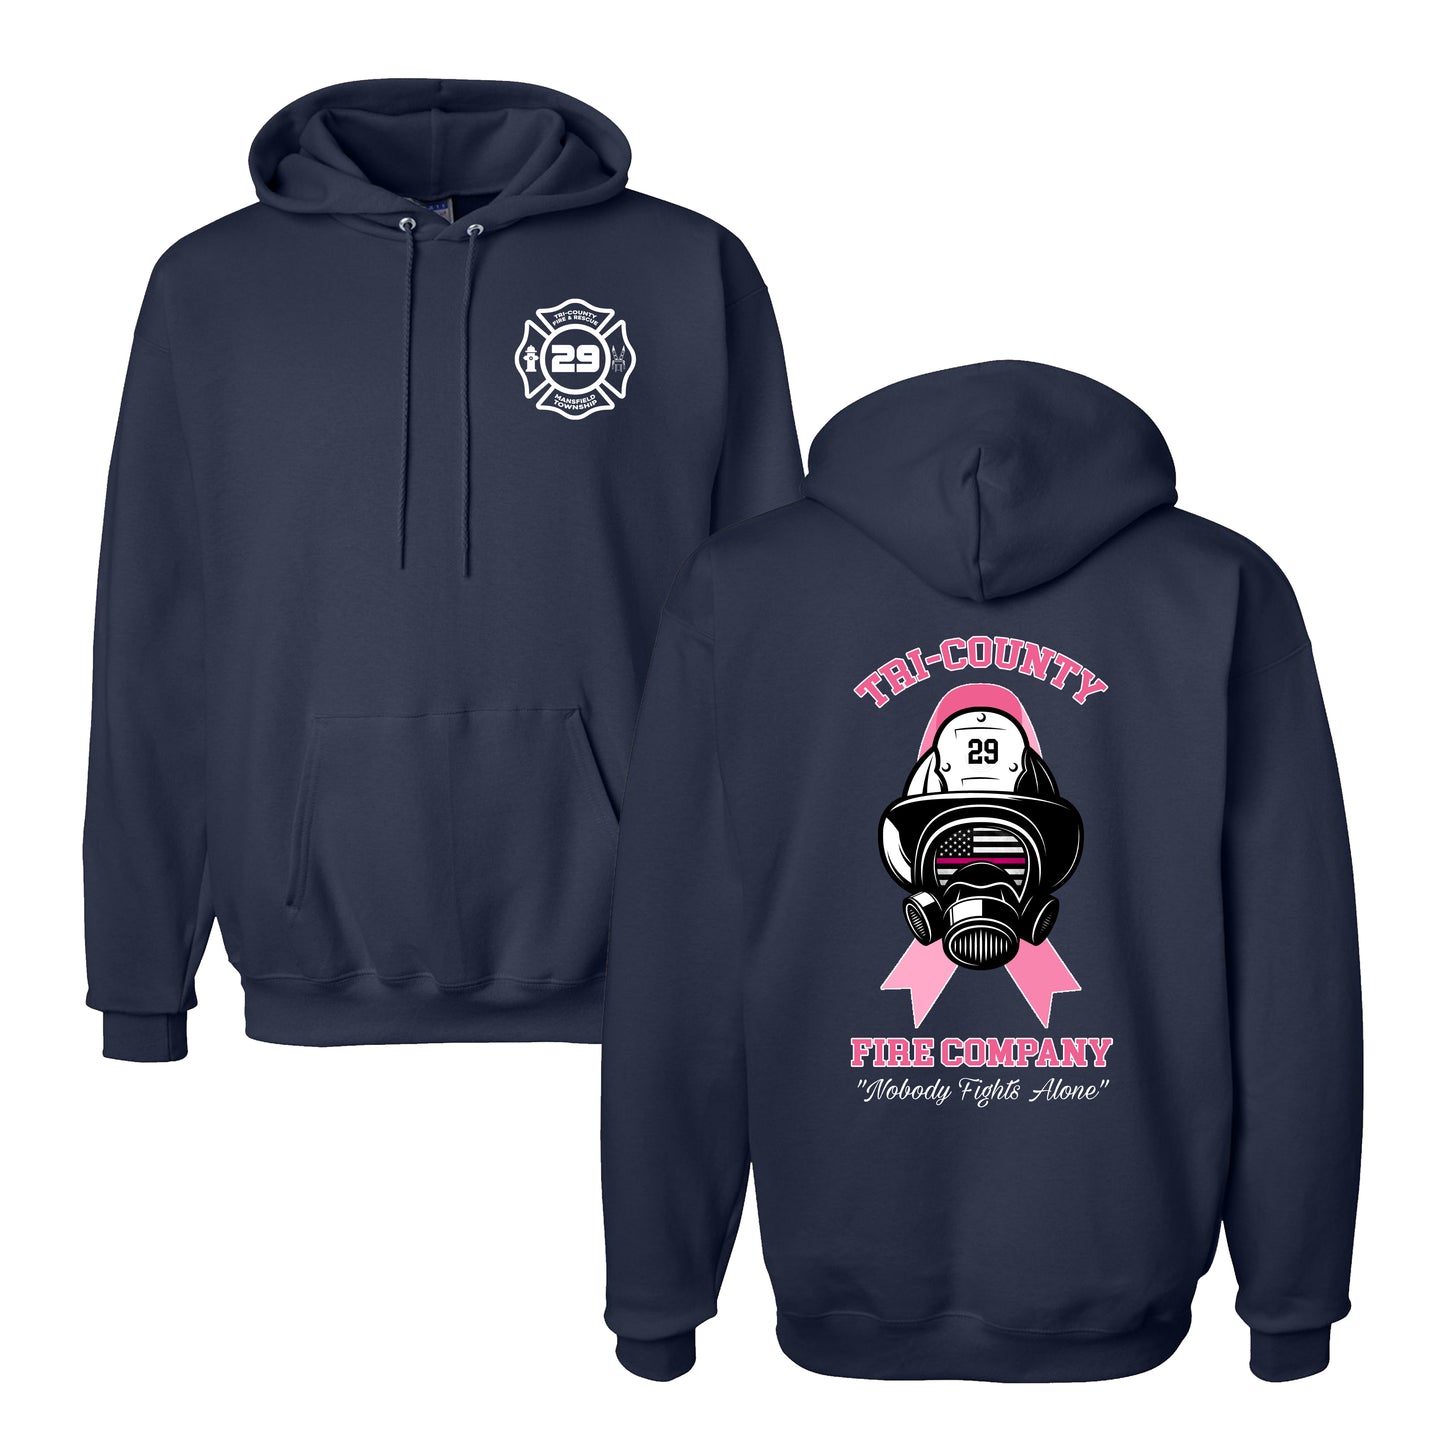 Tri-County Breast Cancer Awareness Pullover Sweatshirt